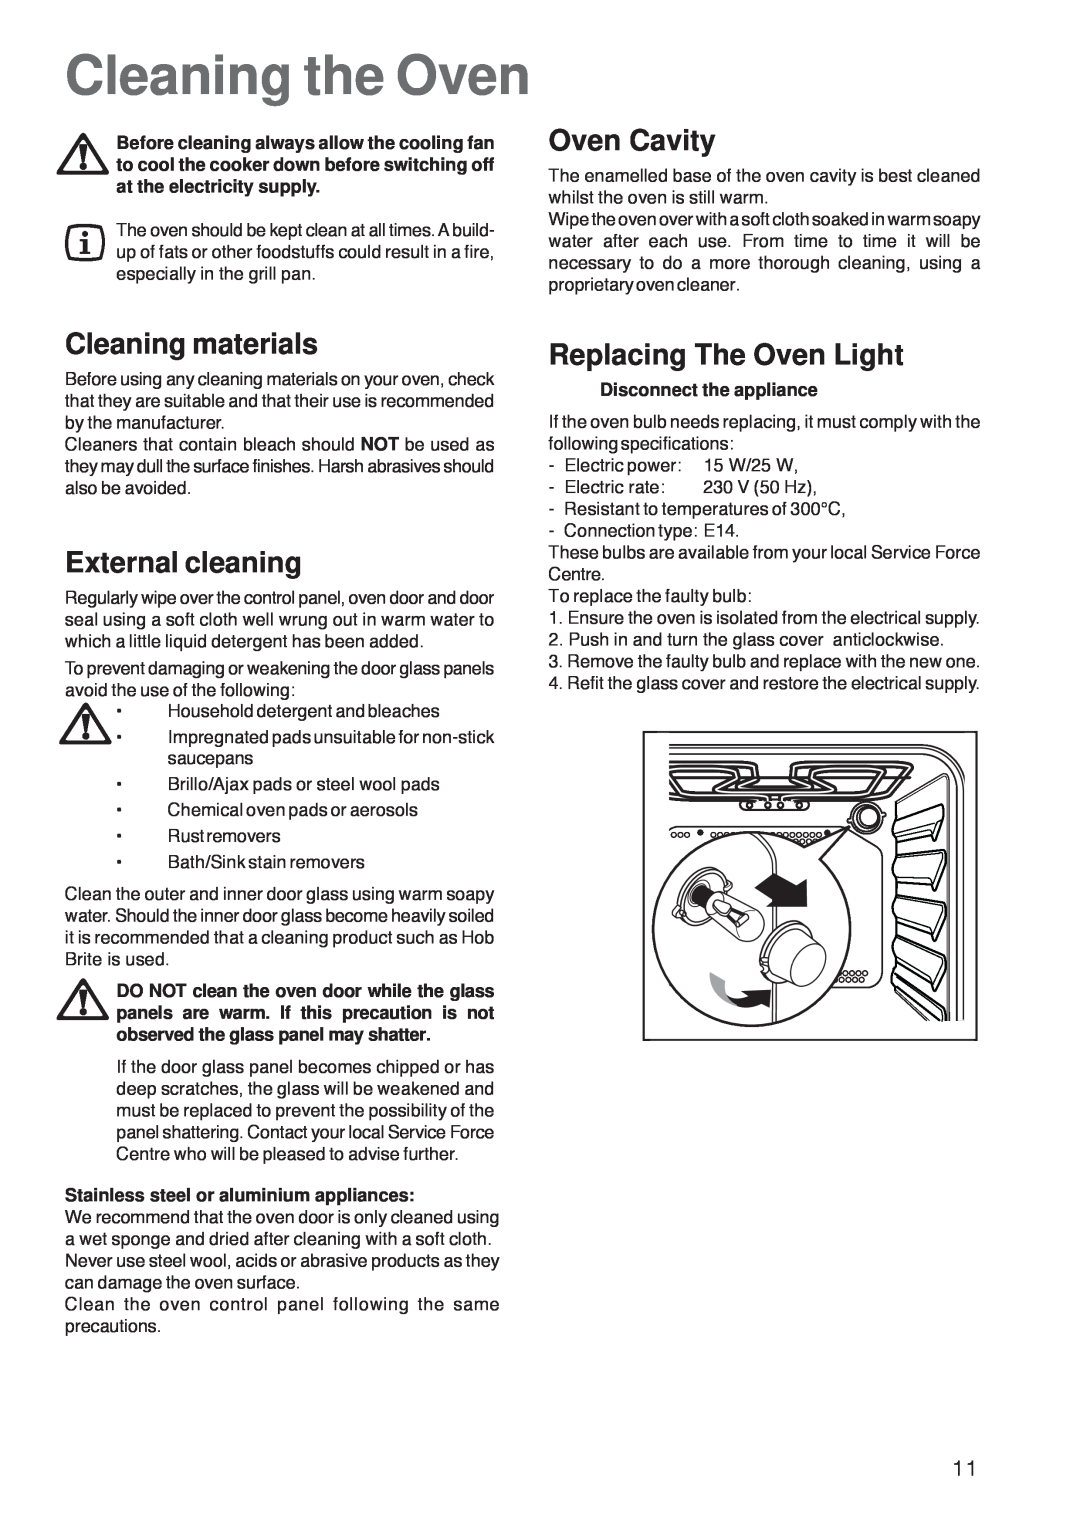 Zanussi ZOB 160 manual Cleaning the Oven, Oven Cavity, Cleaning materials, External cleaning, Replacing The Oven Light 